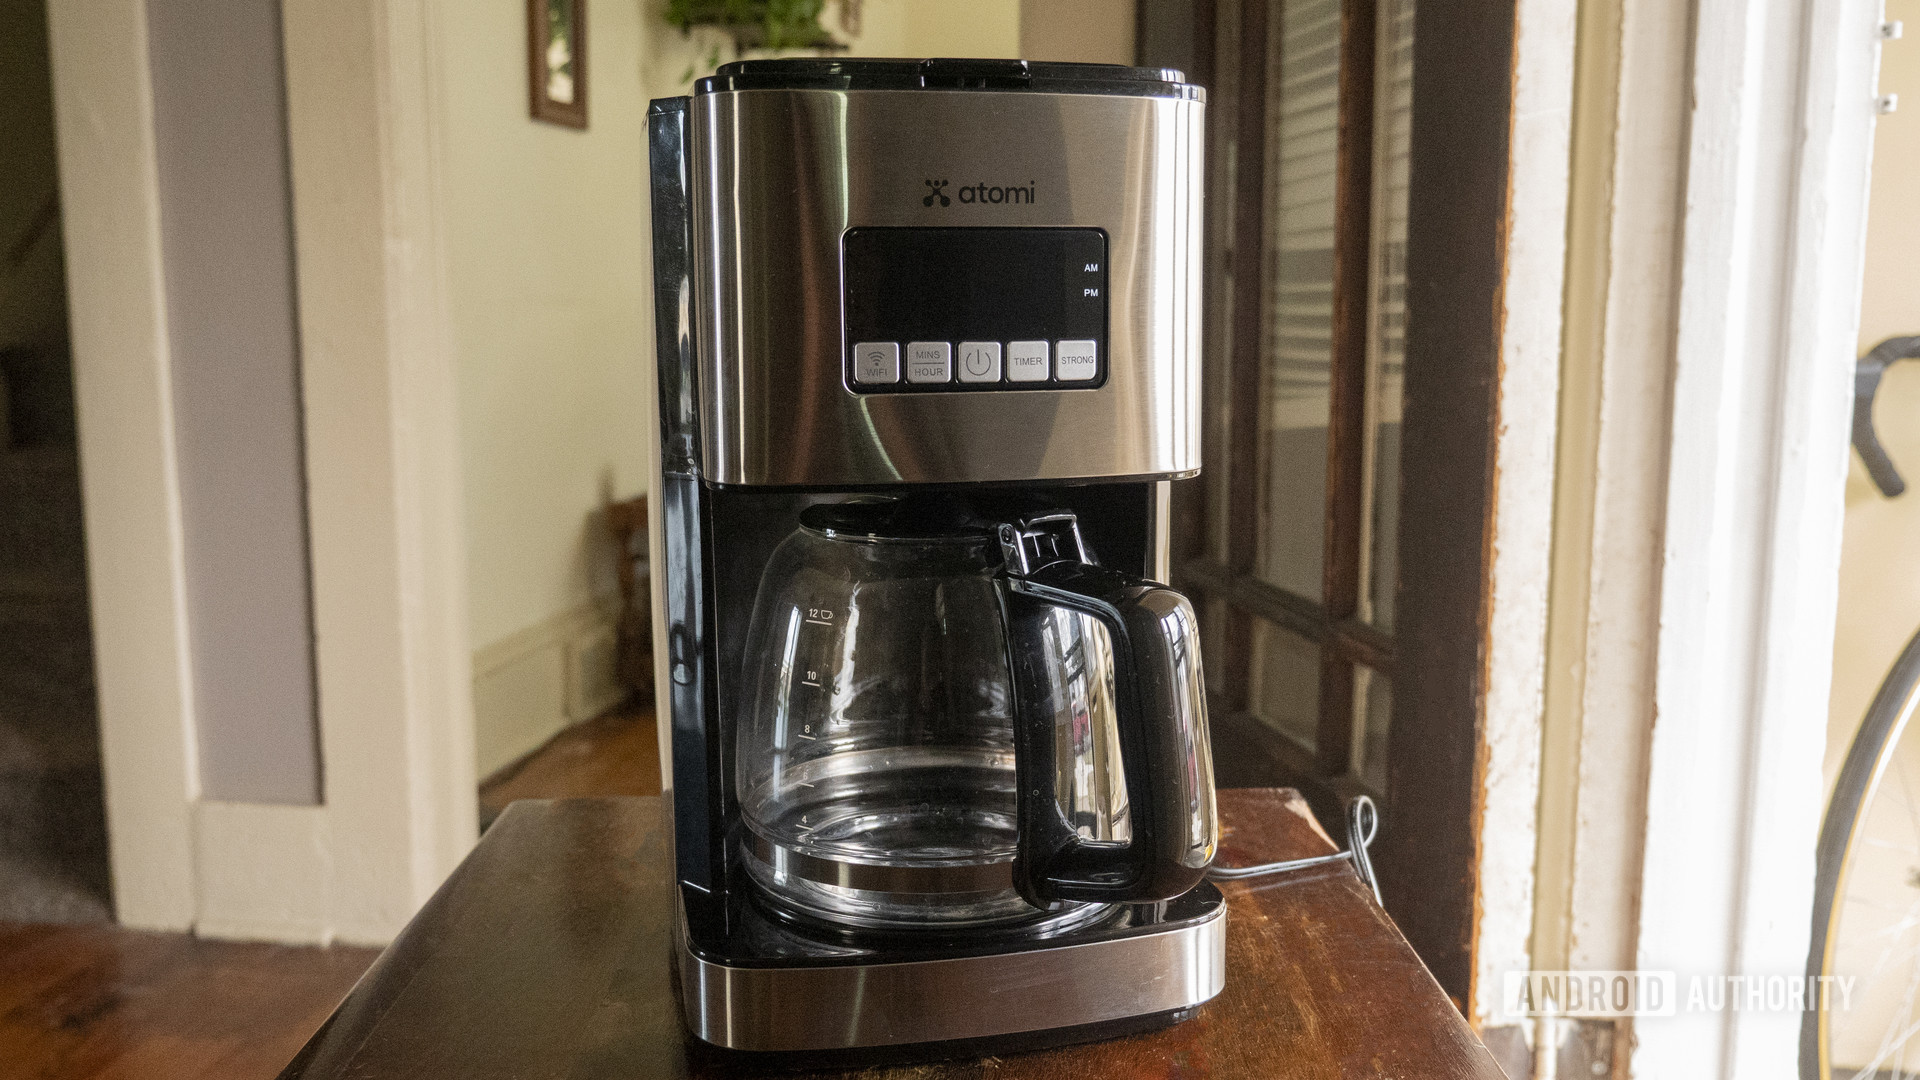 https://www.androidauthority.com/wp-content/uploads/2020/11/atomi-smart-coffee-maker-review-on-table.jpg